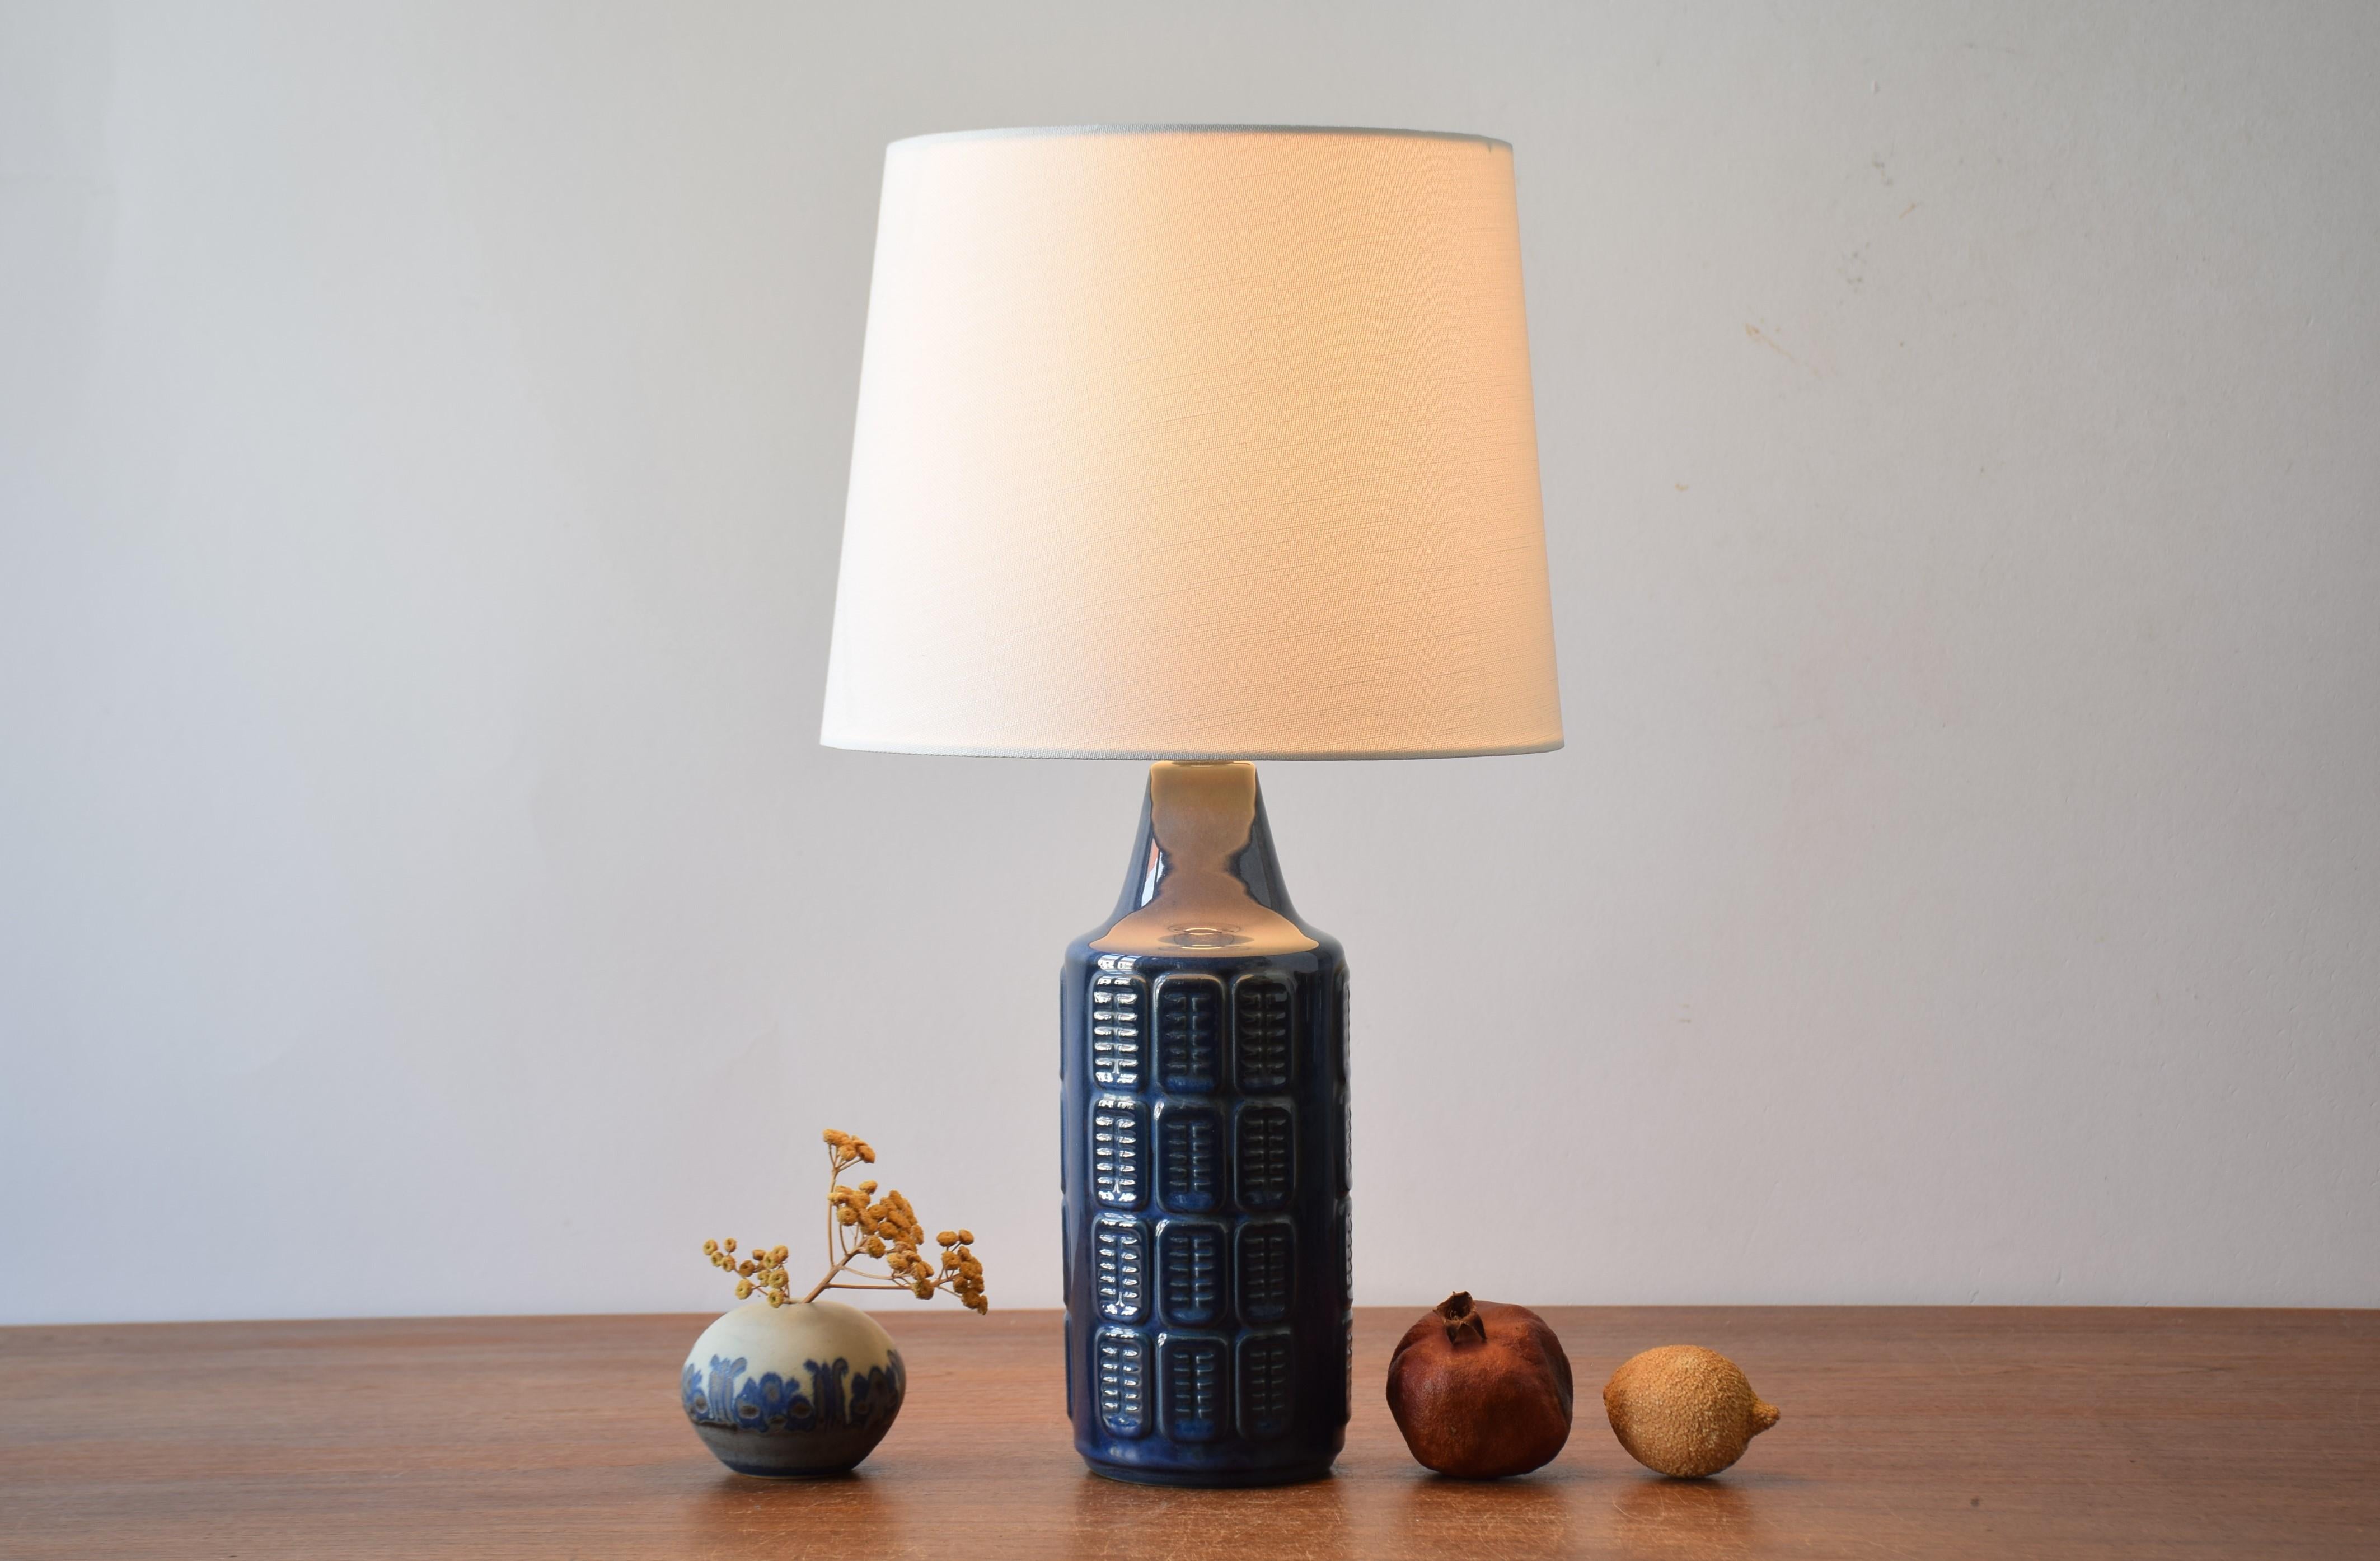 Table lamp by Einar Johansen for Søholm Stentøj, Denmark, circa 1960s.
The lamp has shiny blue glaze with purple elements over an embossed repeated graphic decor. 

Included is a new lamp shade designed and made in Denmark. It is made of woven